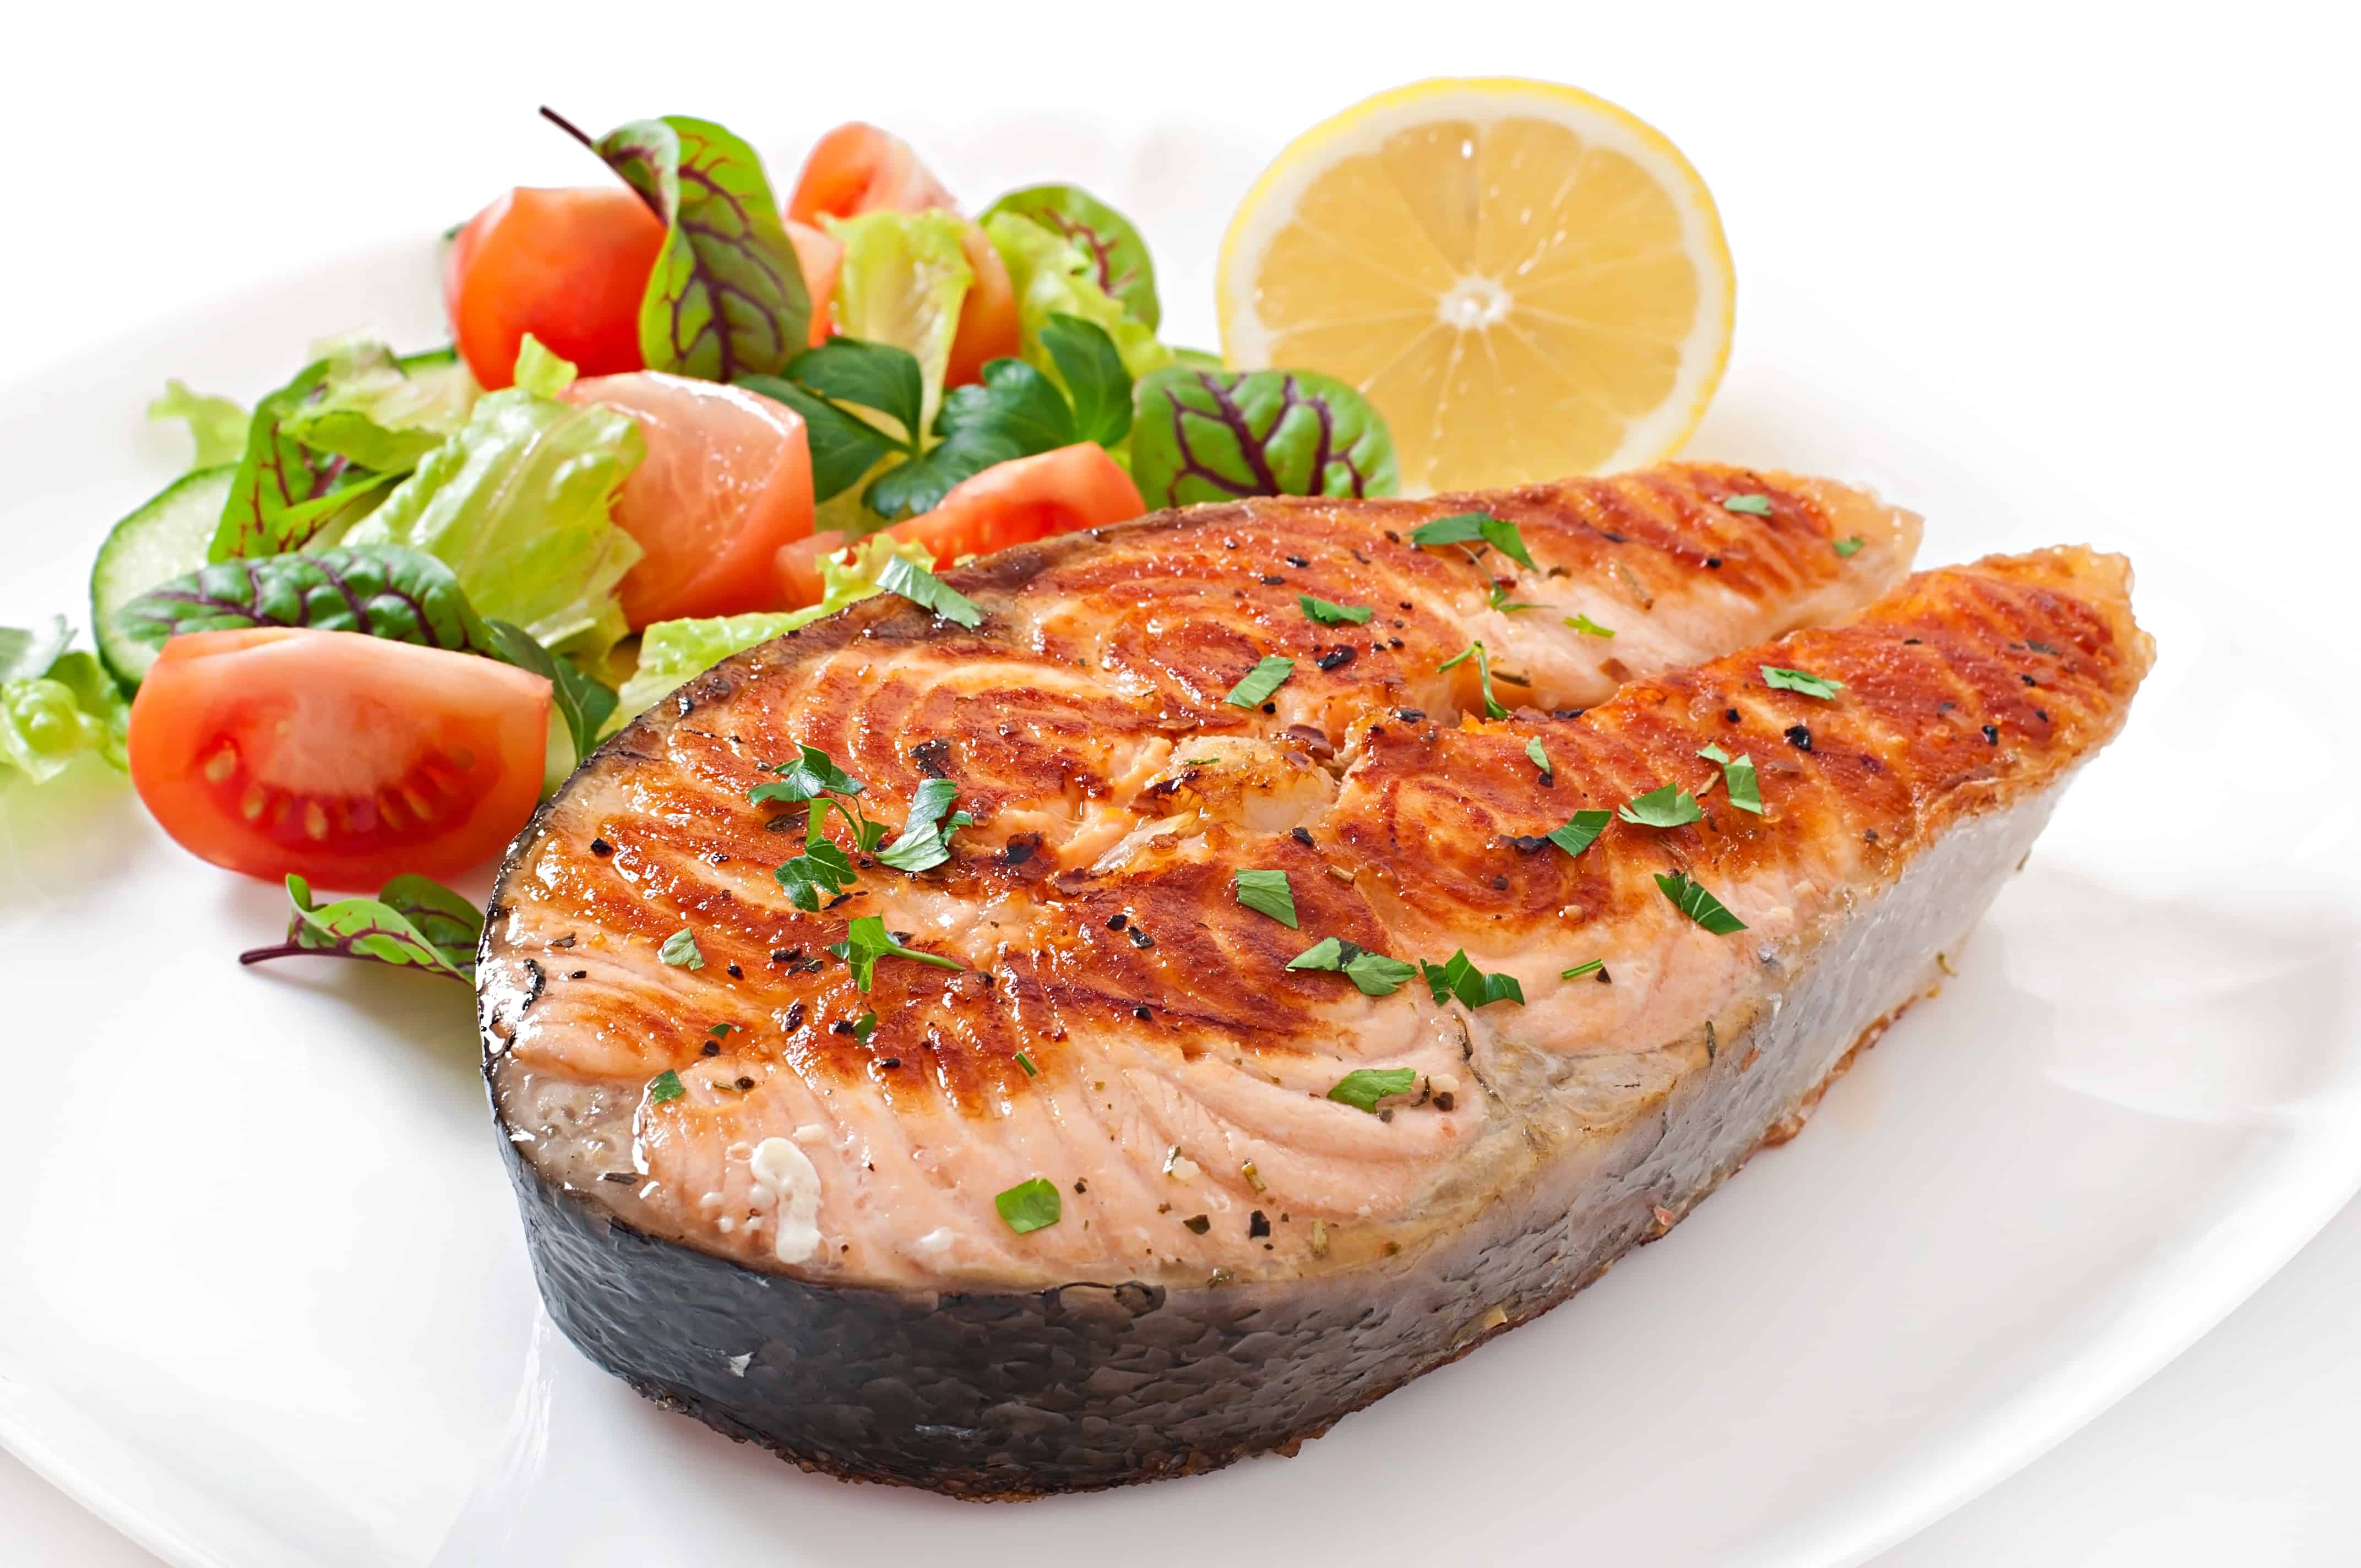 SALMON Eat a balanced and nutritious diet that includes healthy proteins and fats.